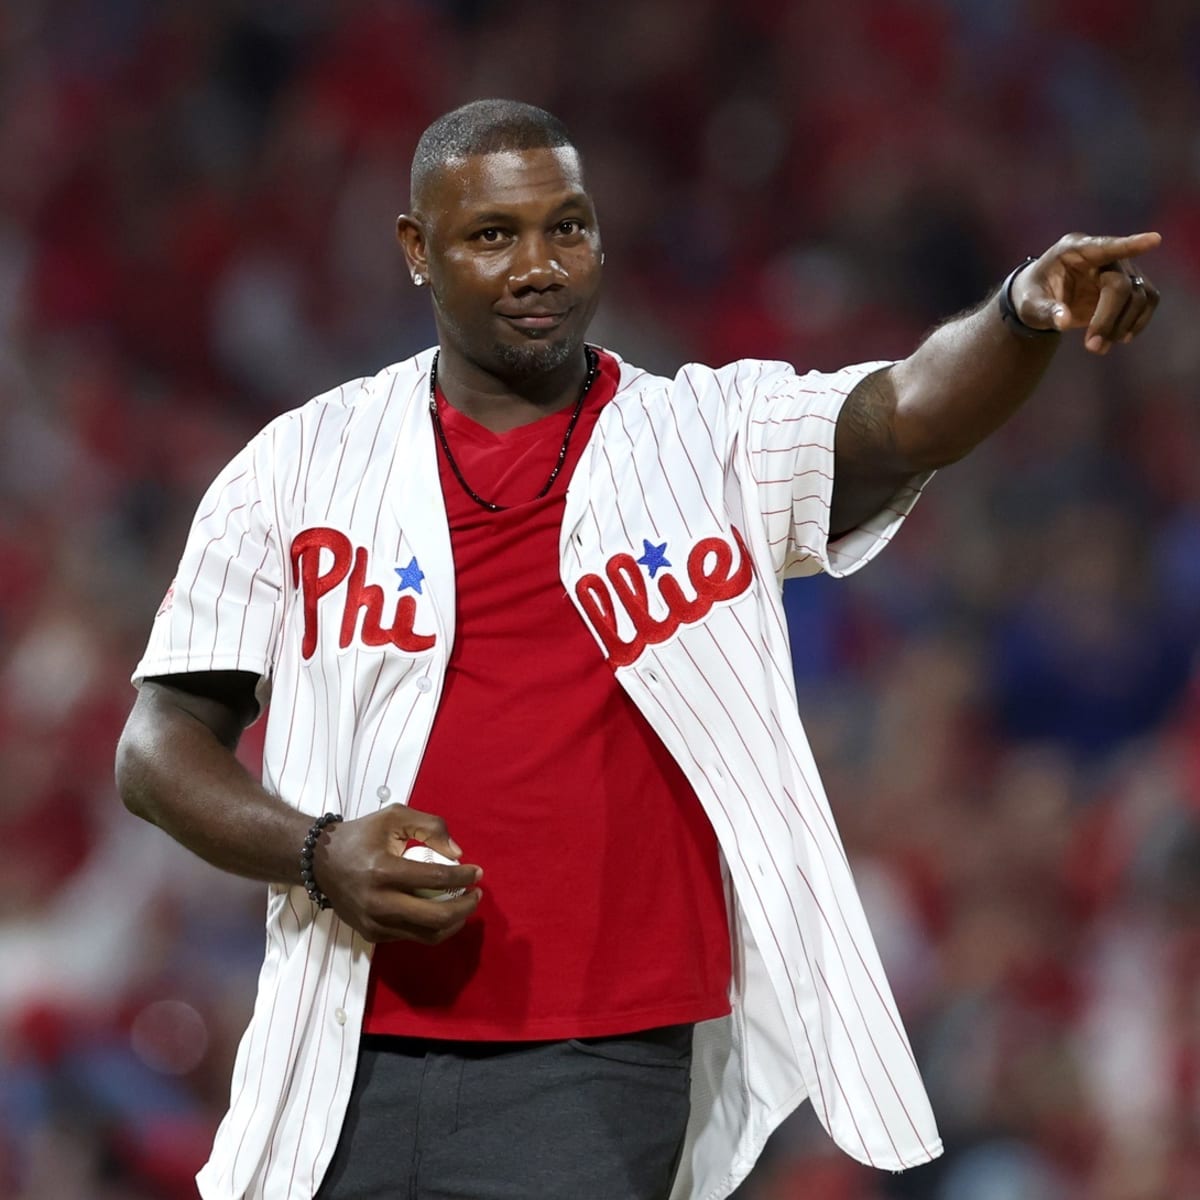 WATCH: Phillies Great Ryan Howard Throws First Pitch Before NLCS Game 4 -  Fastball